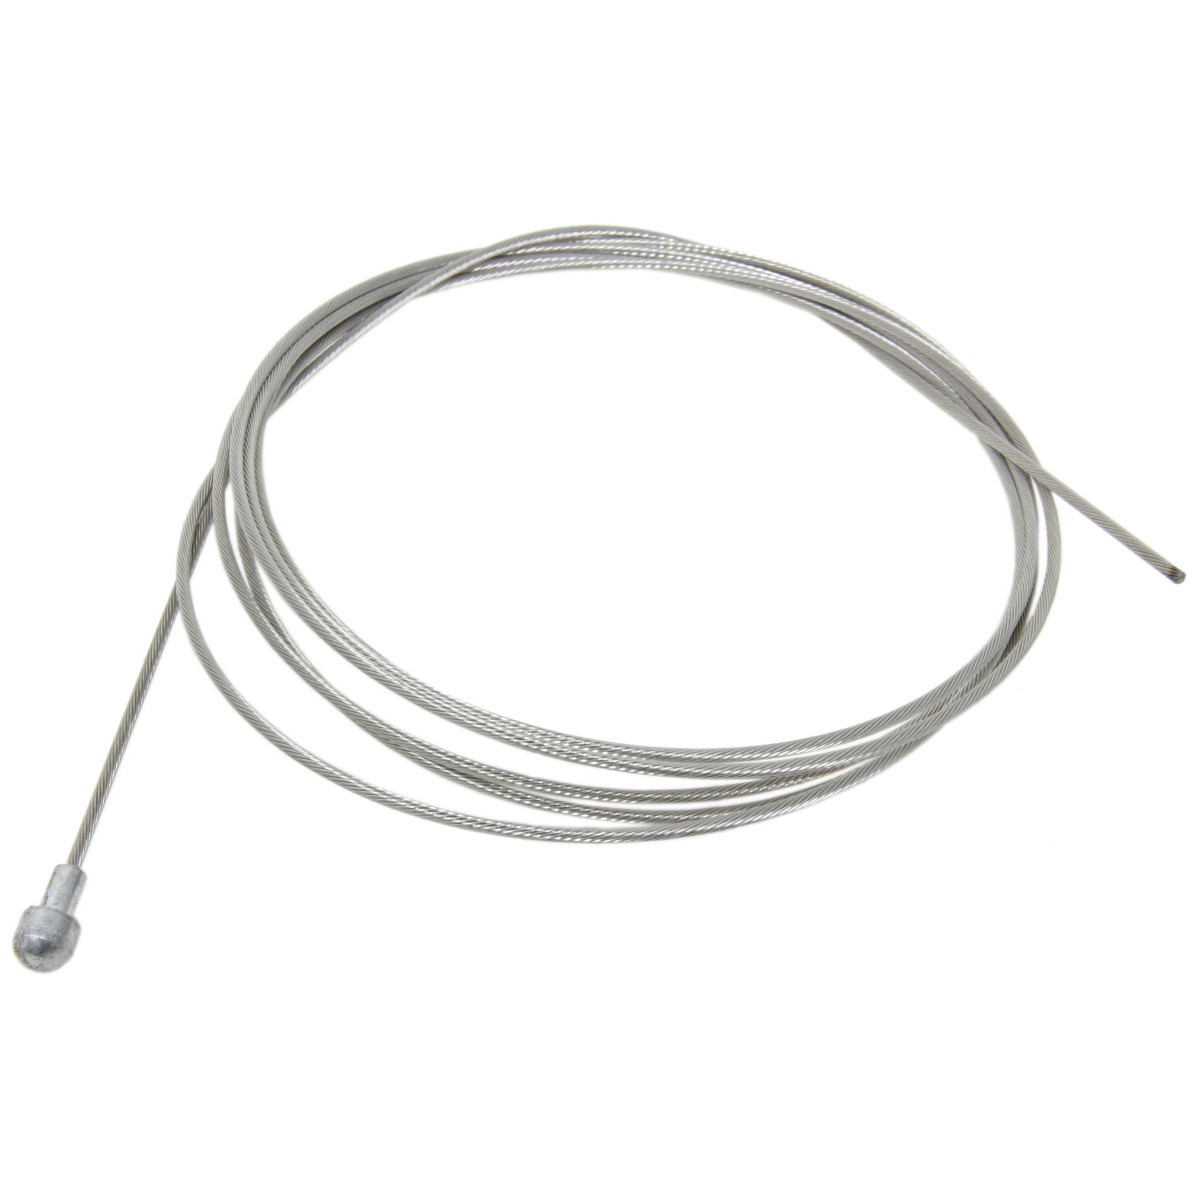 Shimano Road brake cable set with SIL-TEC coated inner wire RRP £36.99